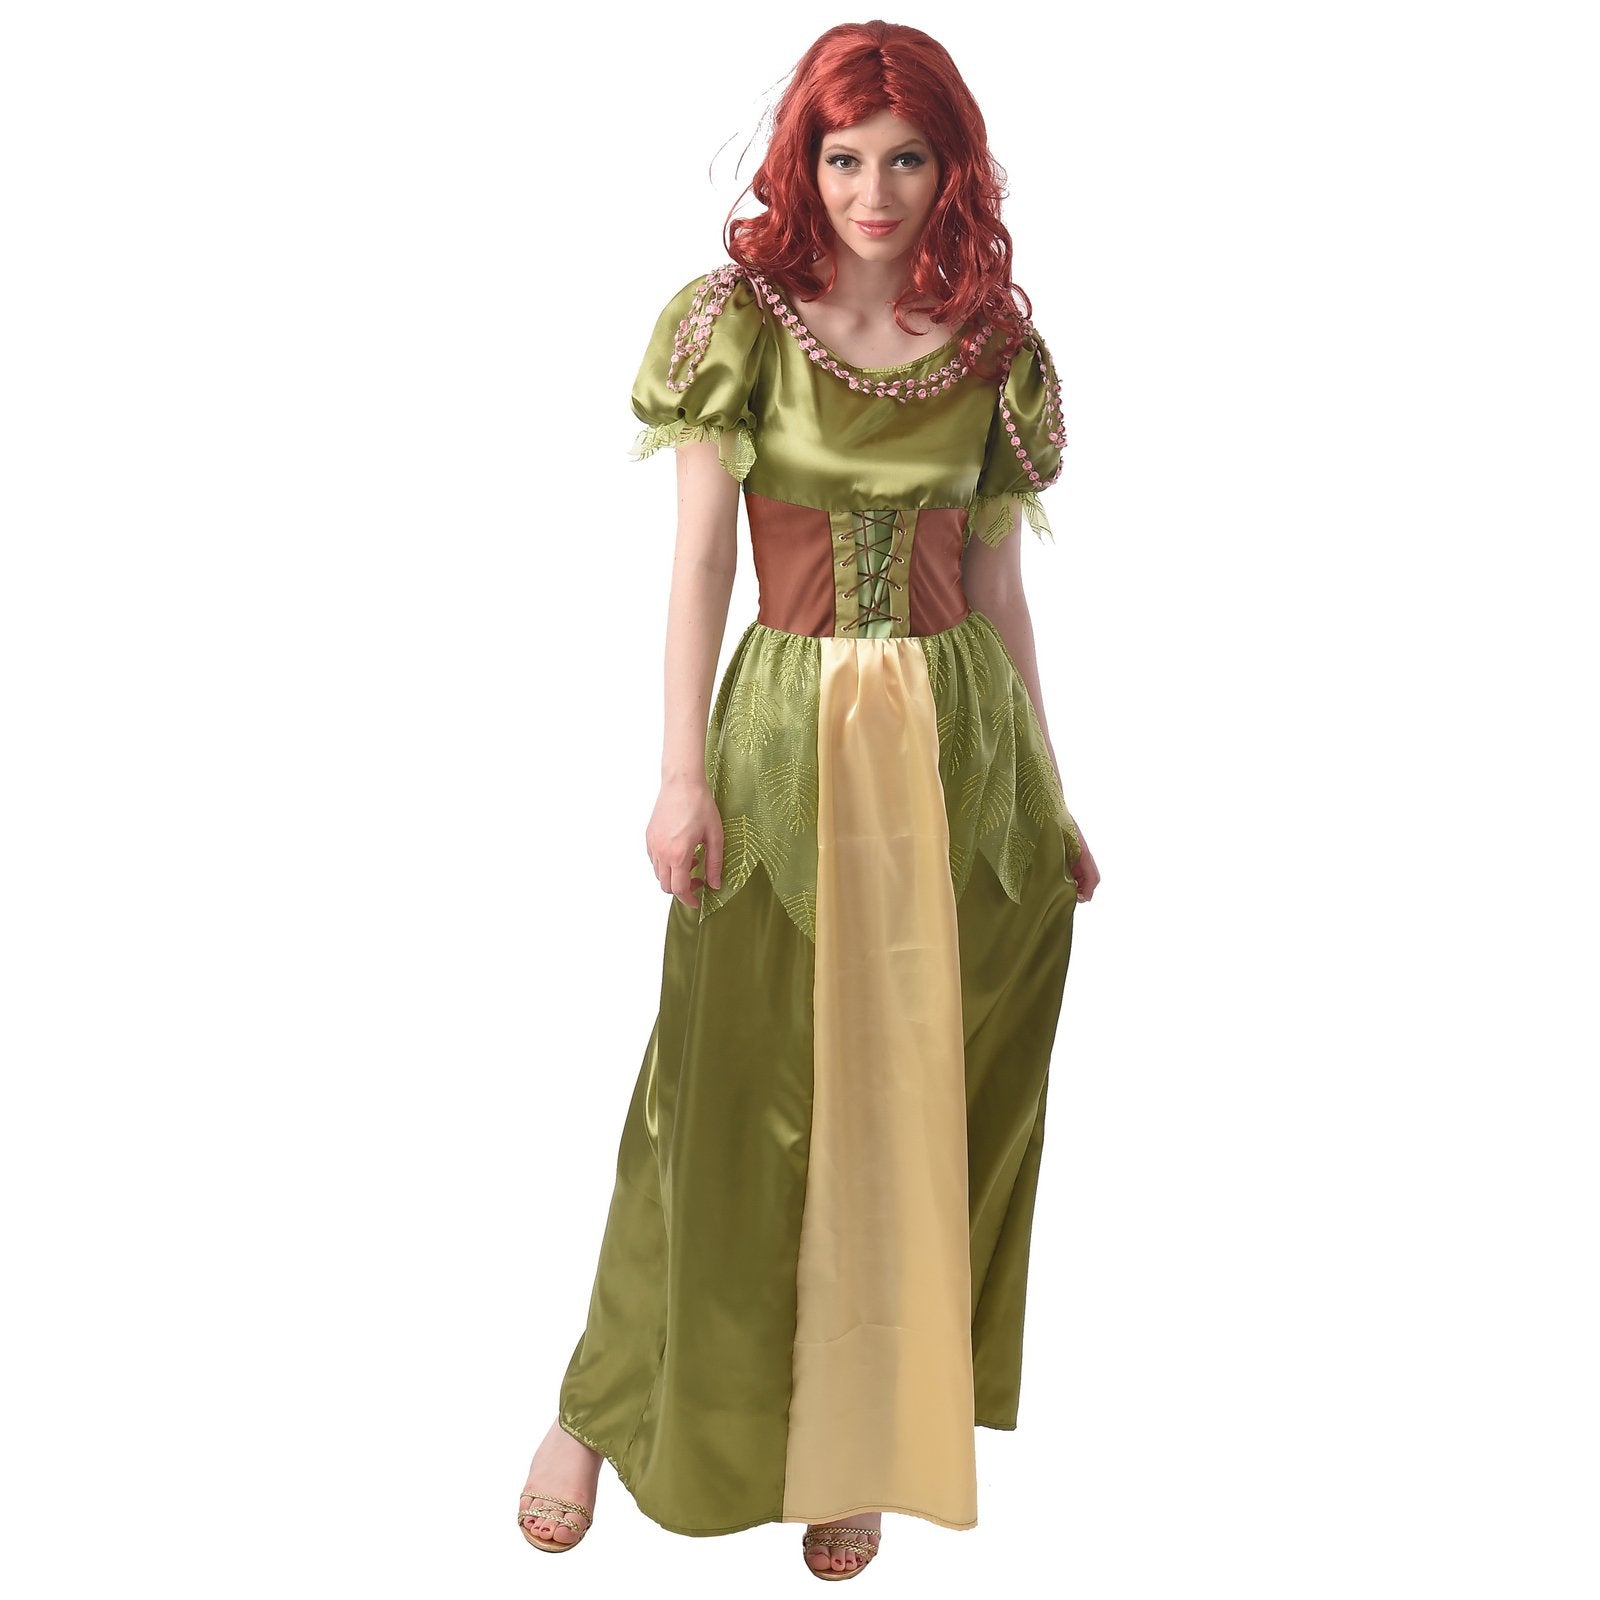 Costume Adult Medieval Princess Fiona & Forest Fairy Large